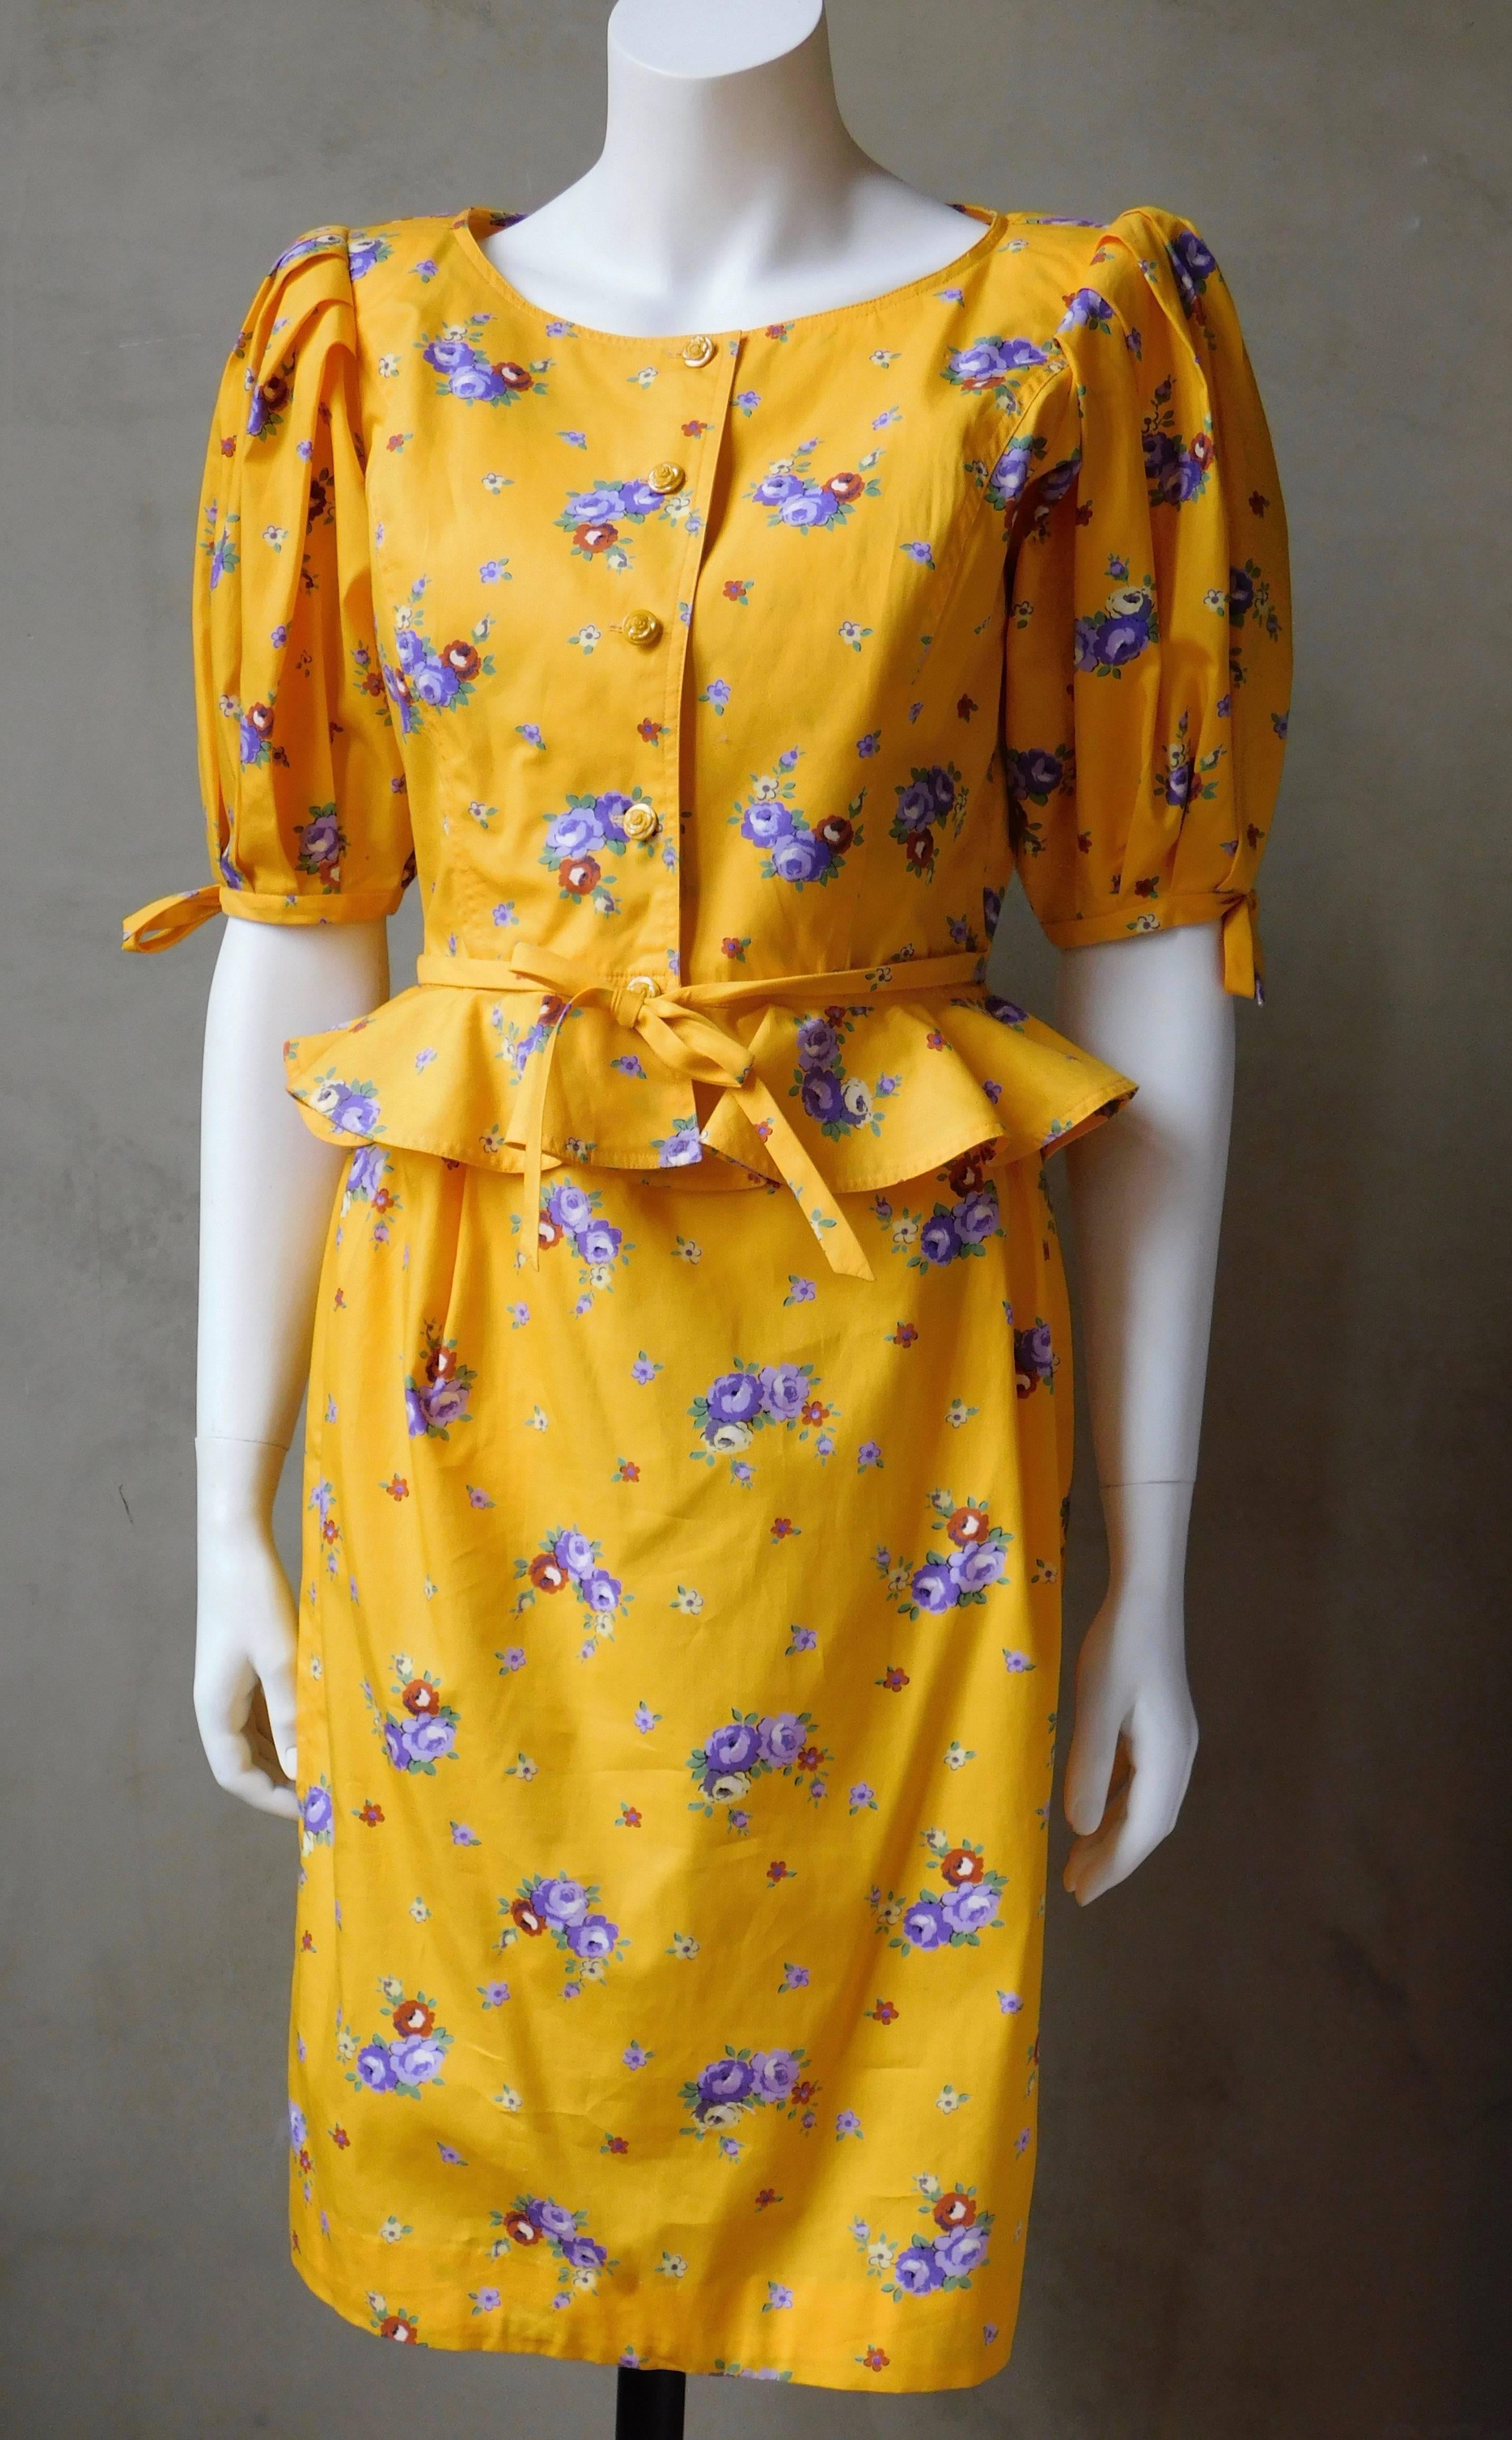 The perfect summer party dress ensemble in sunflower yellow cotton with a very French print of small purple flowers .Made in Italy by Ungaro solo donna Paris 1980s.
Marked size 8/42 , but this garment has been altered when purchased and is a size